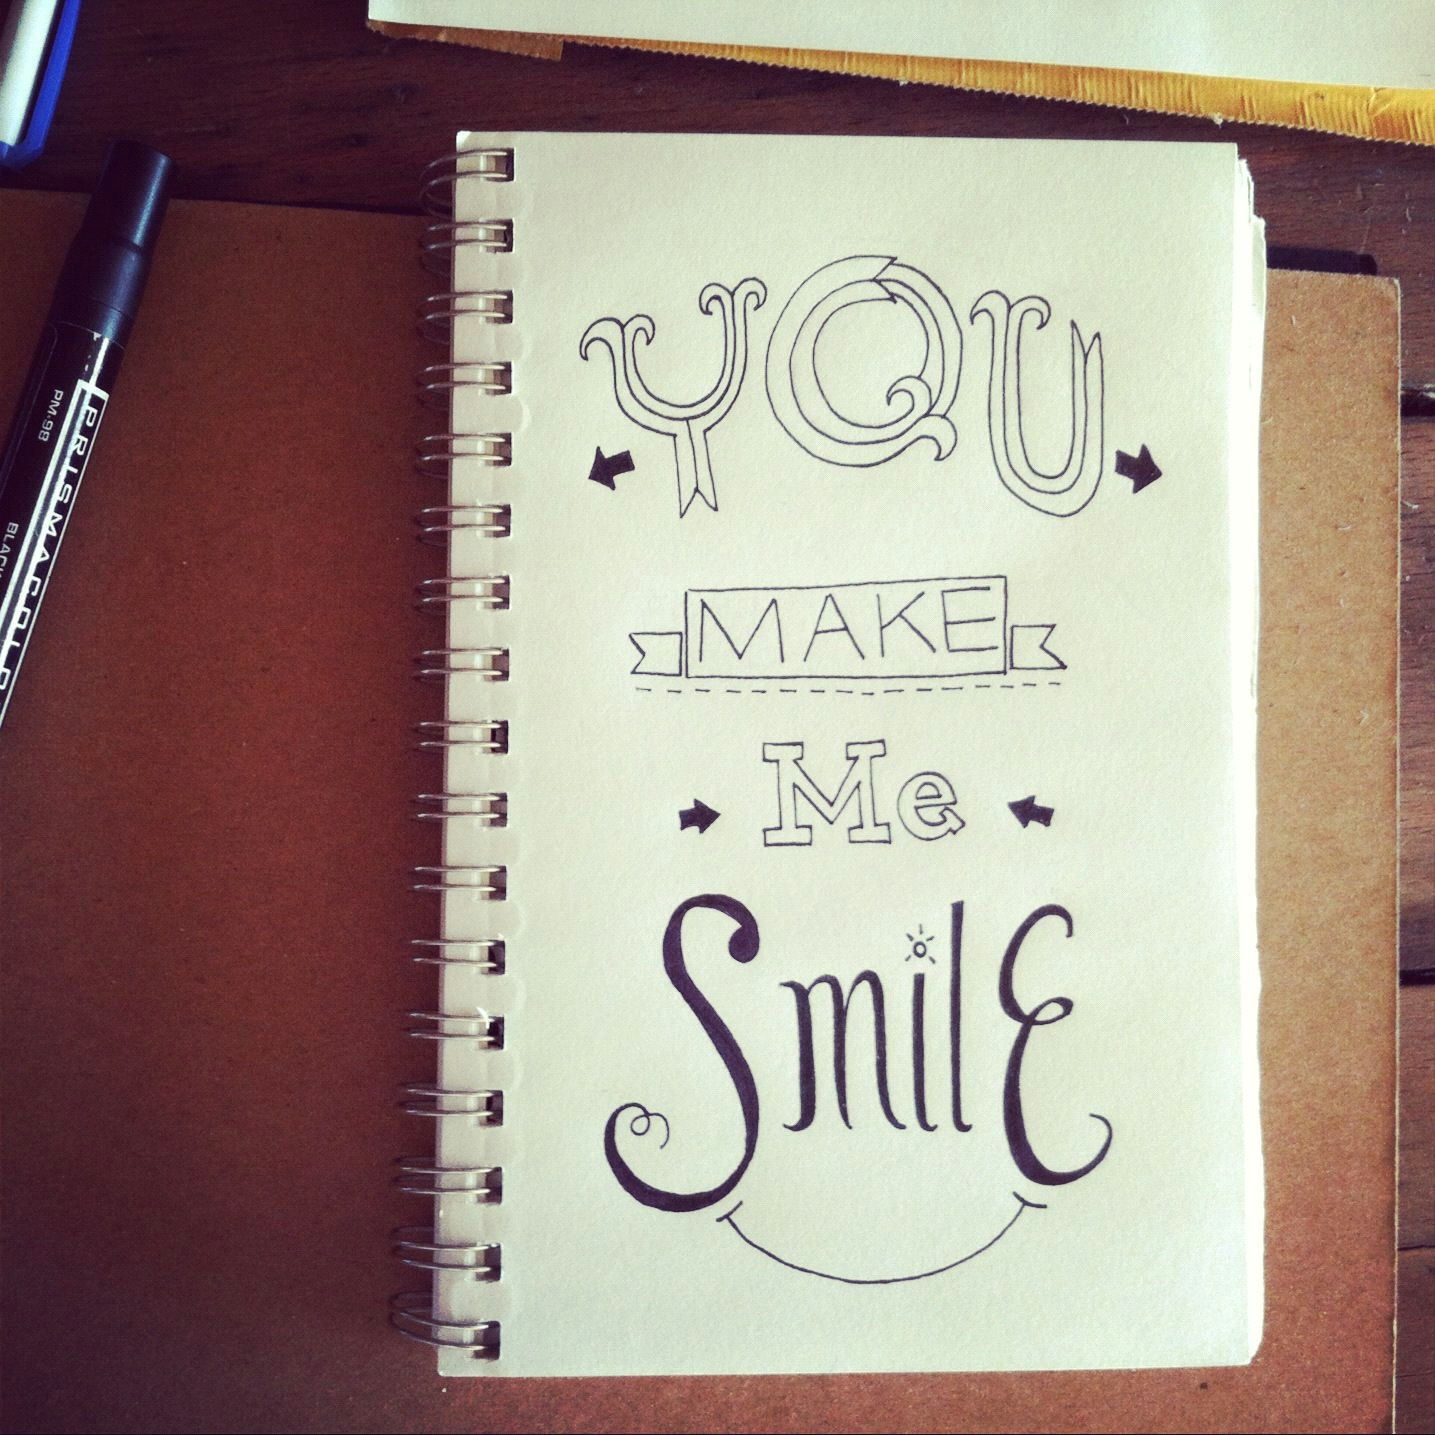 you make me smile a doodle i did for a doodle a day project on instagram smile quote